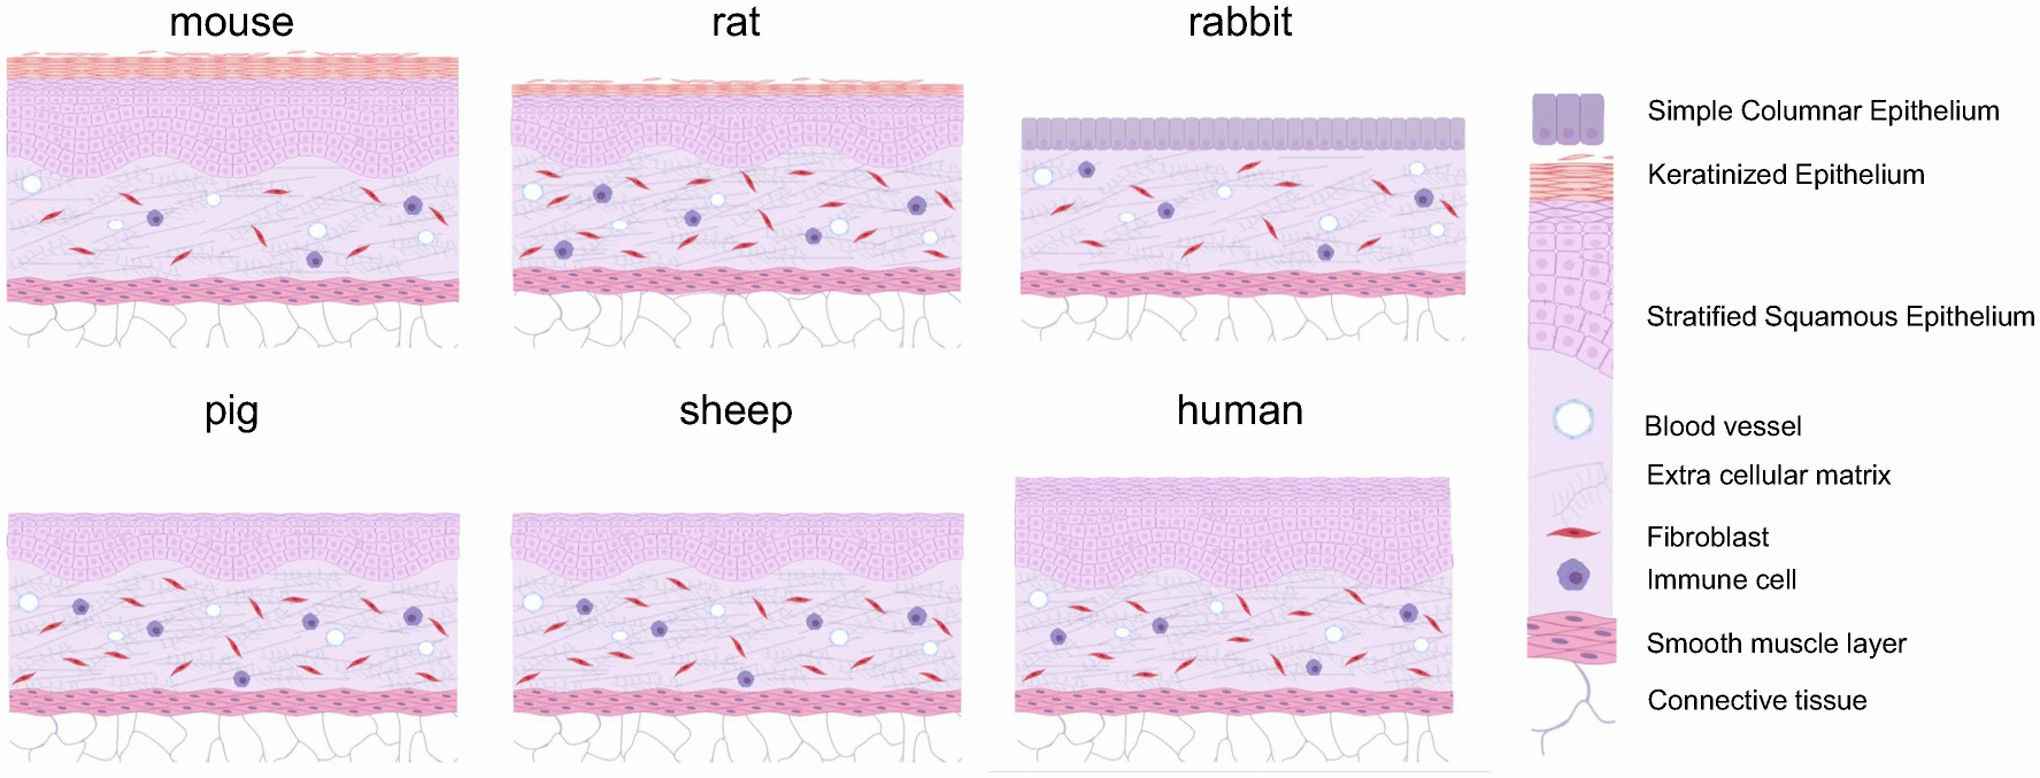 Composition of vaginal tissue layers across species.